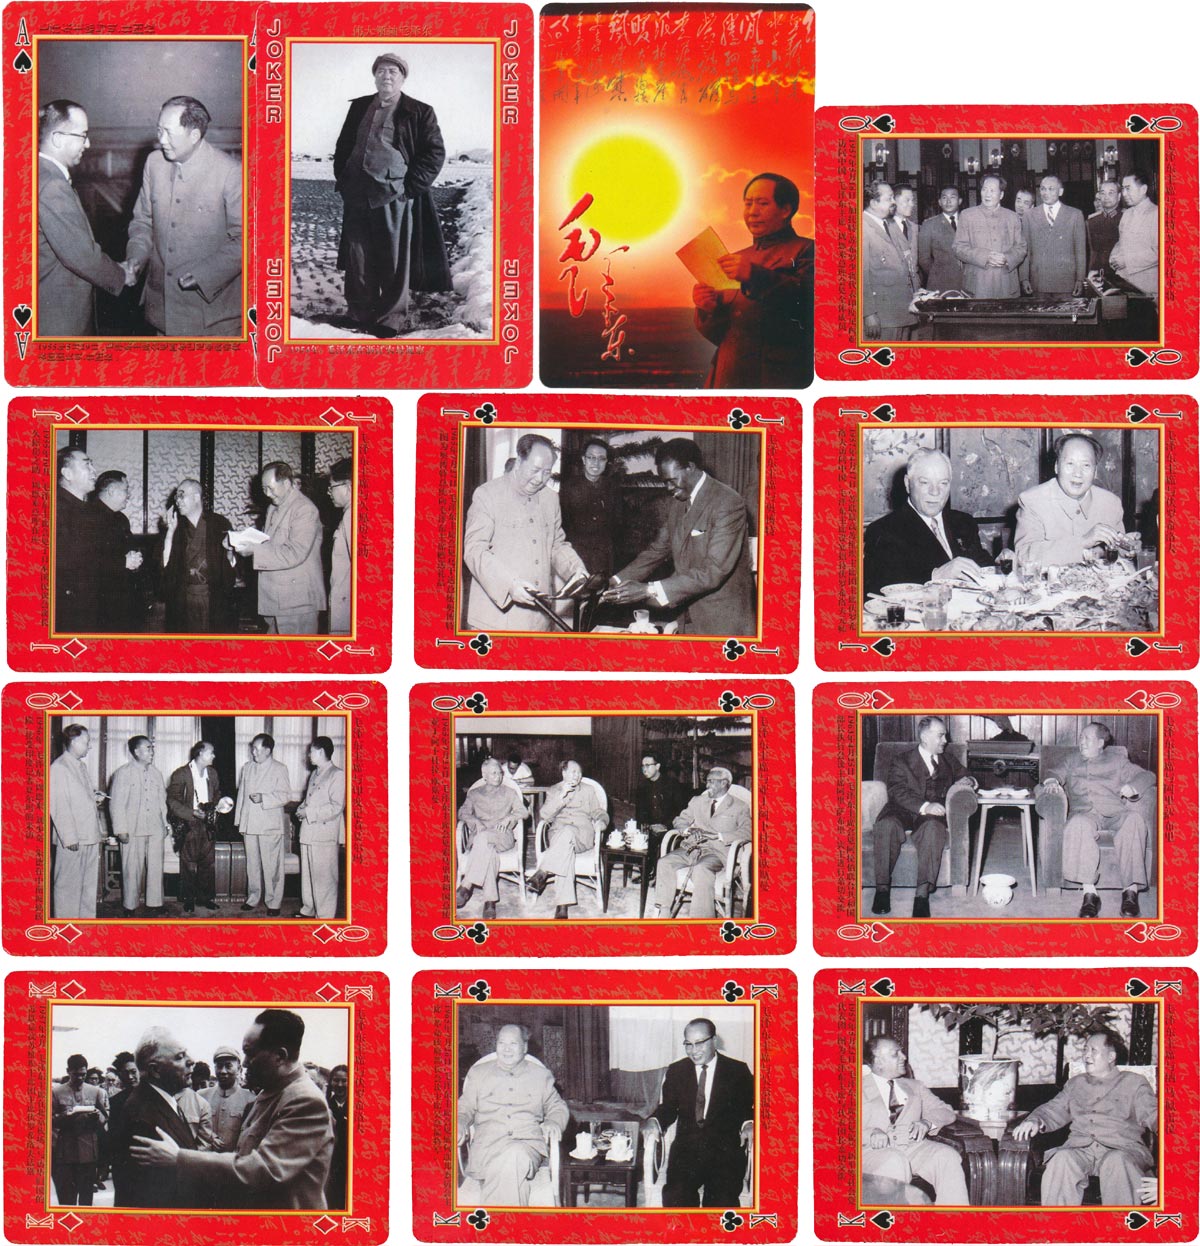 playing cards celebrating the story of the Chinese leader and statesman Mao Zedong